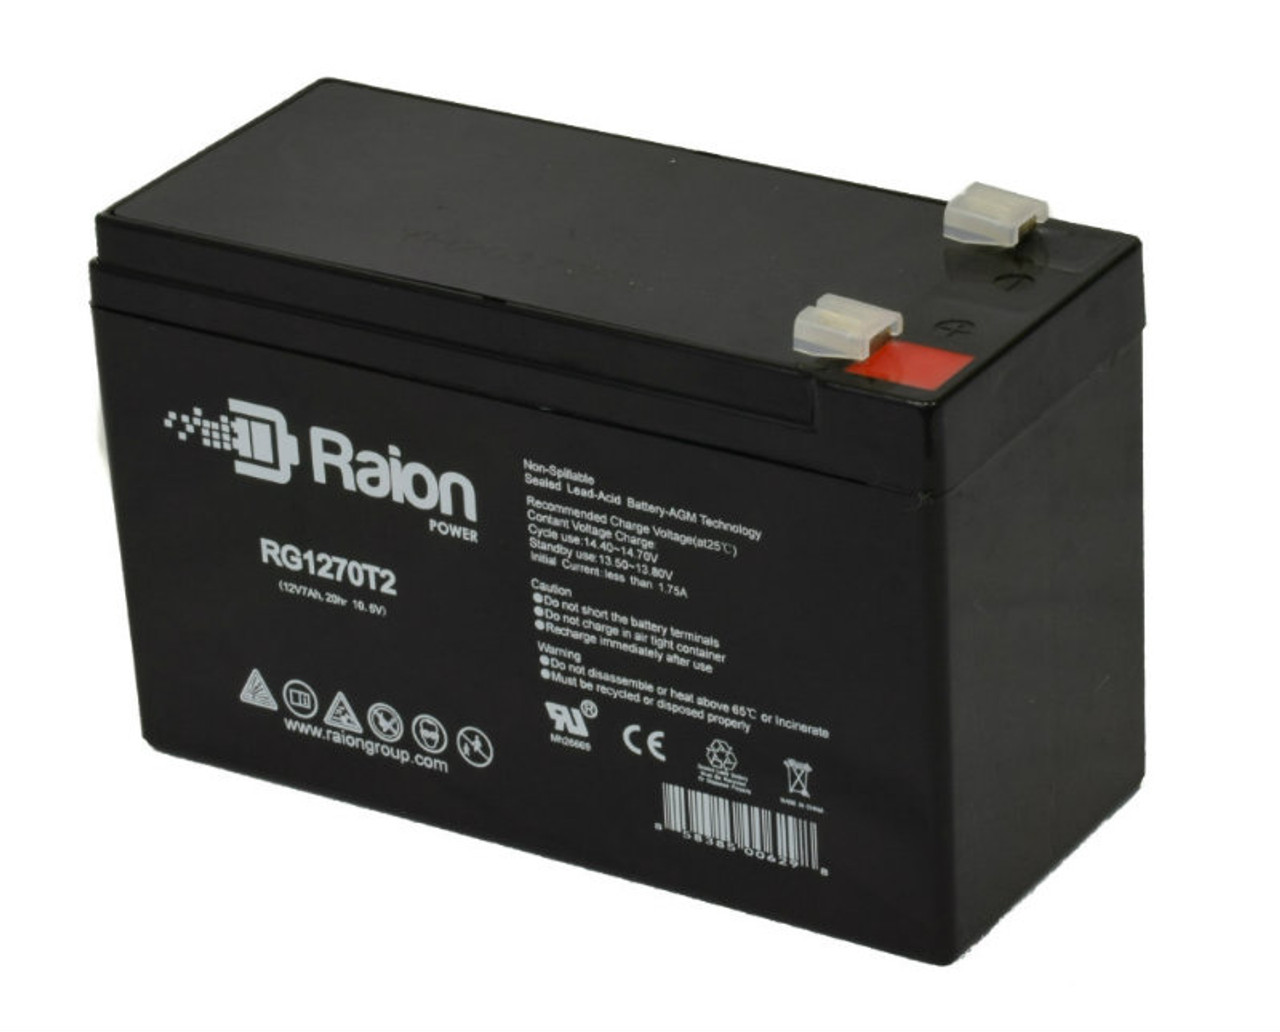 Raion Power RG1270T1 12V 7Ah Non-Spillable Replacement Battery for Vision CP1270A